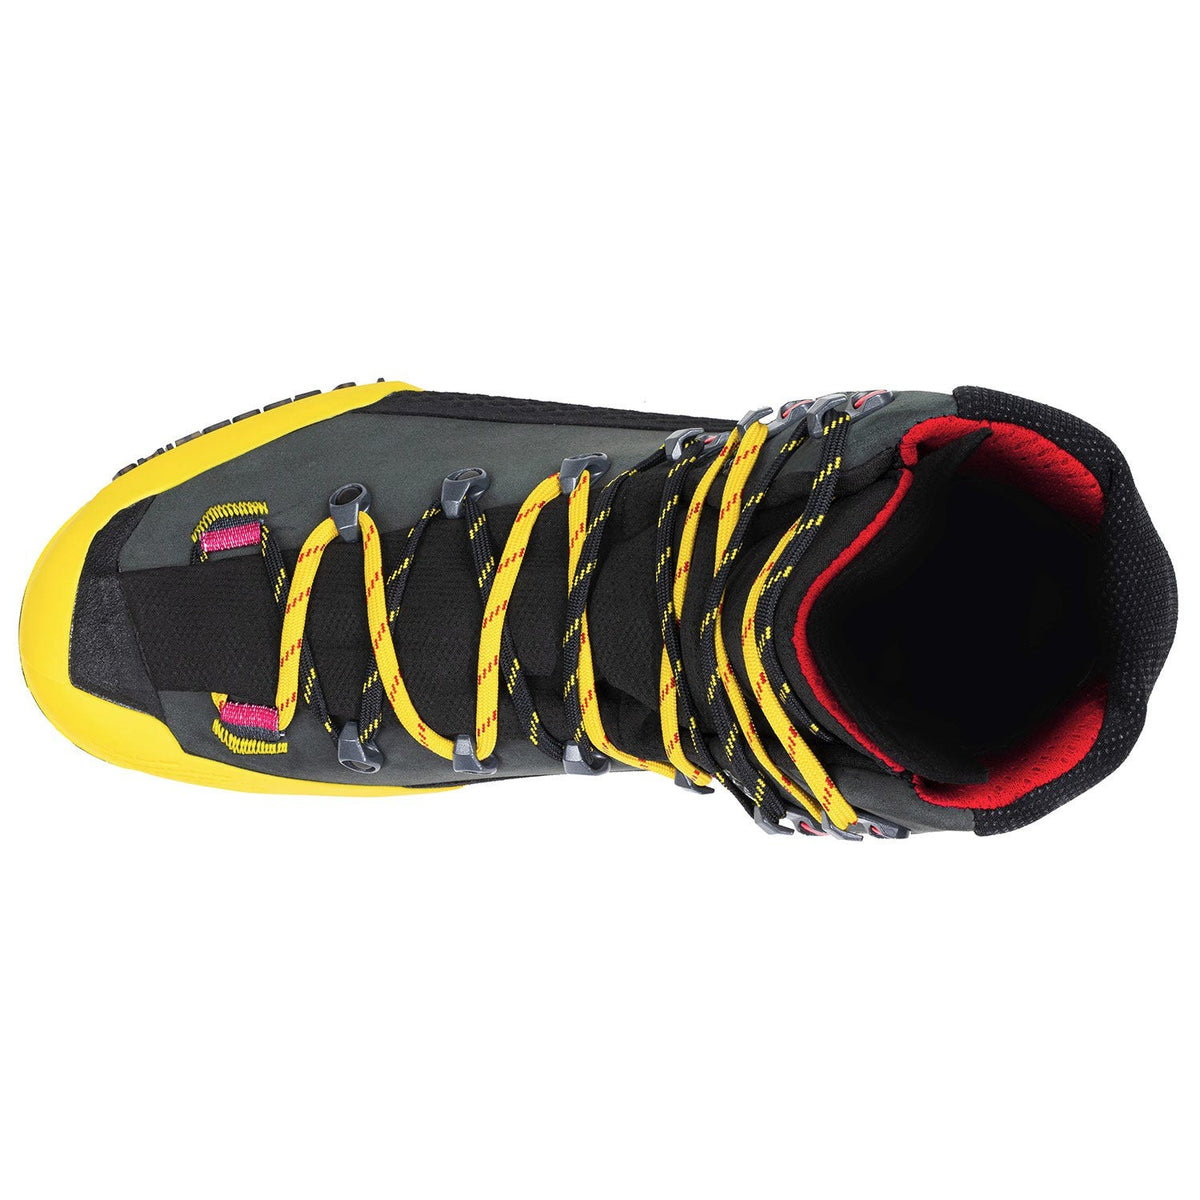 La Sportiva Aequilibrium LT GTX from above view